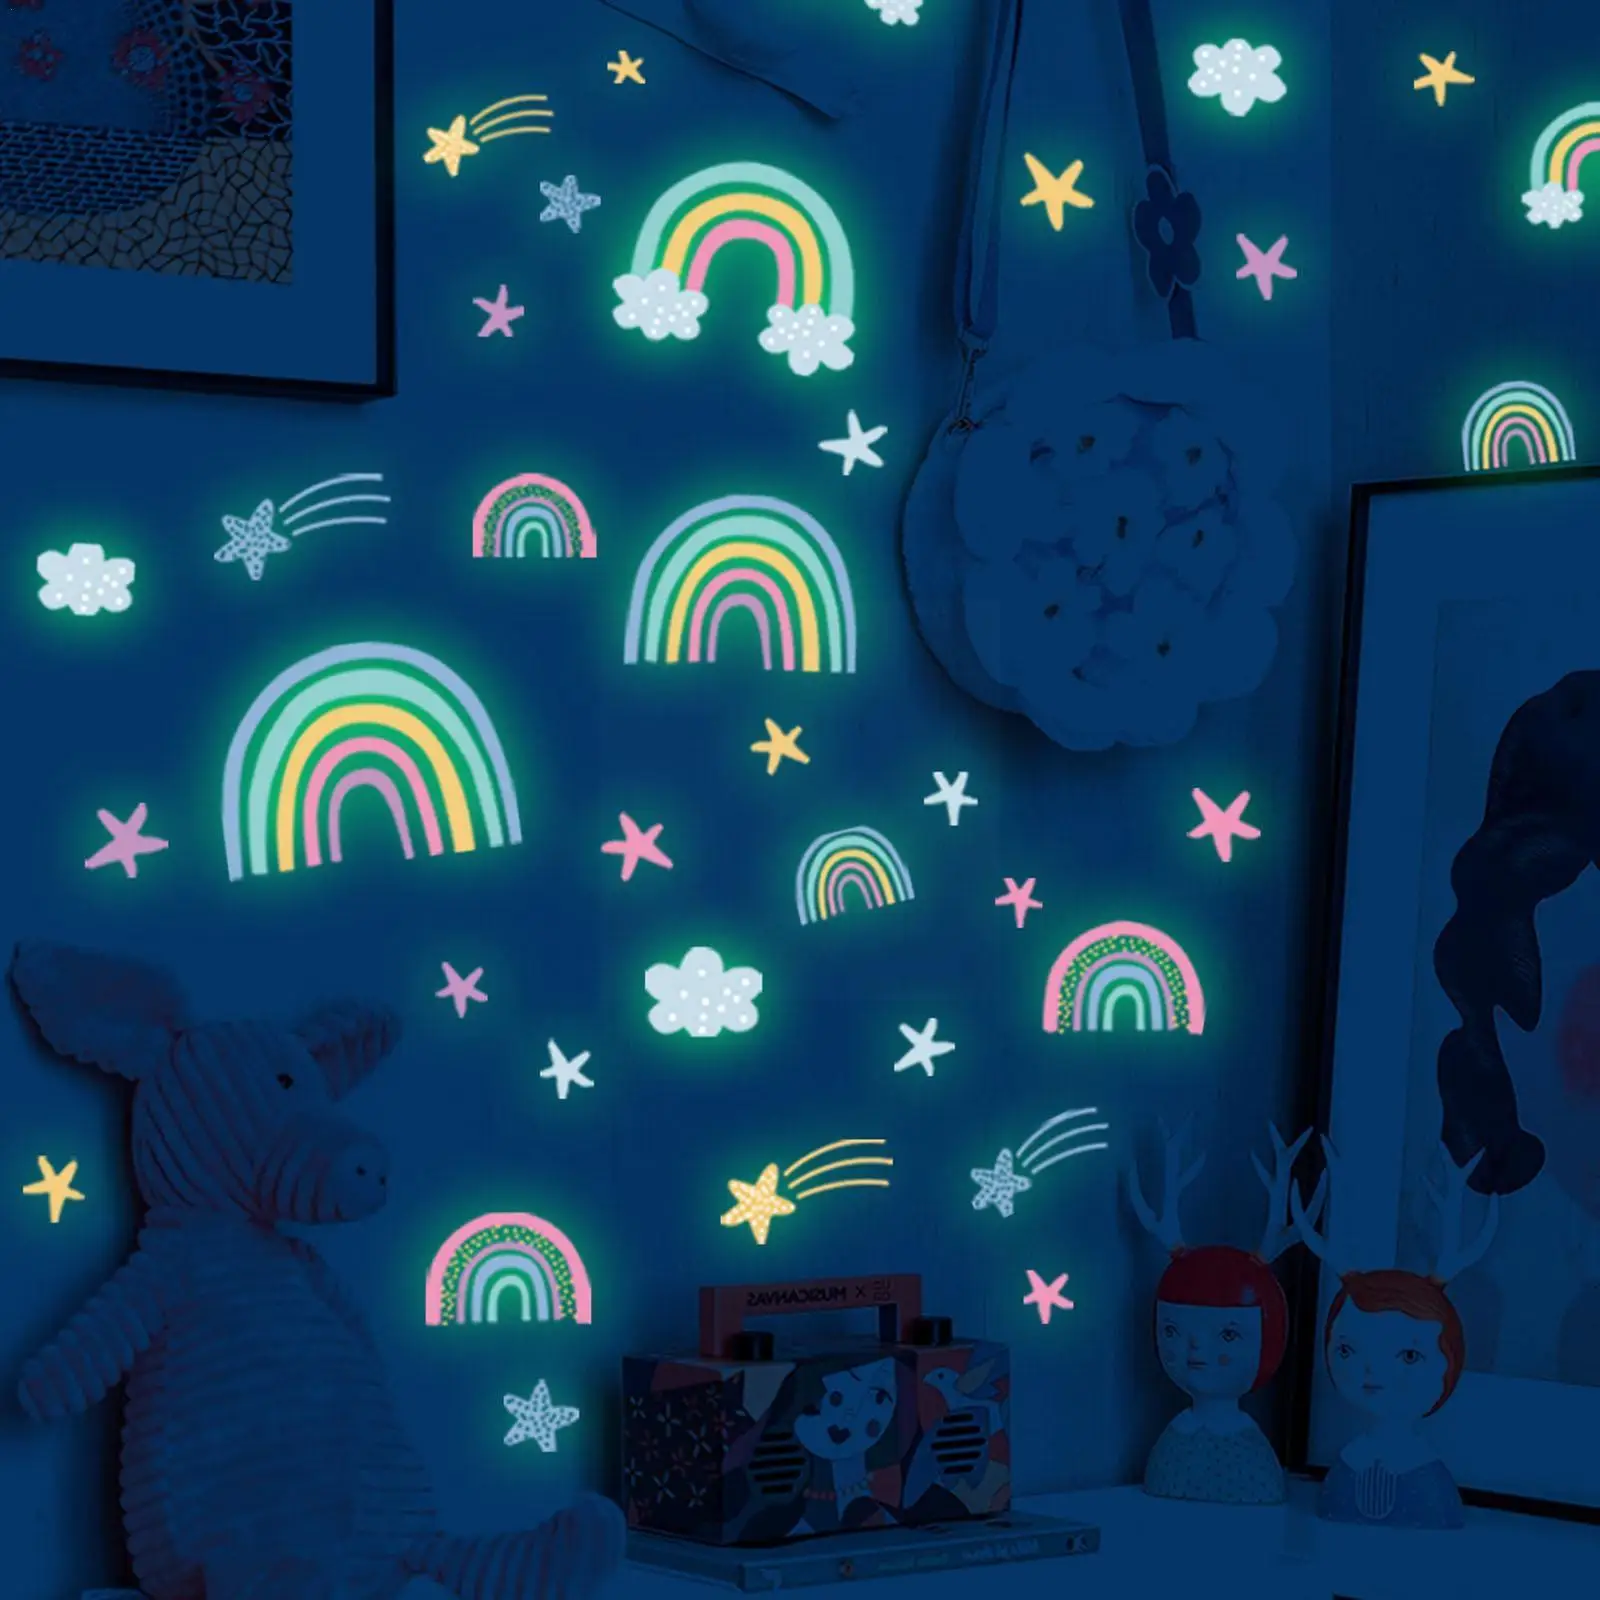 

Rainbow Clouds Stars Fluorescent Wall Stickers Bedroom Children's Living Room Decoration Self-adhesive Stickers Room Wall R4d0